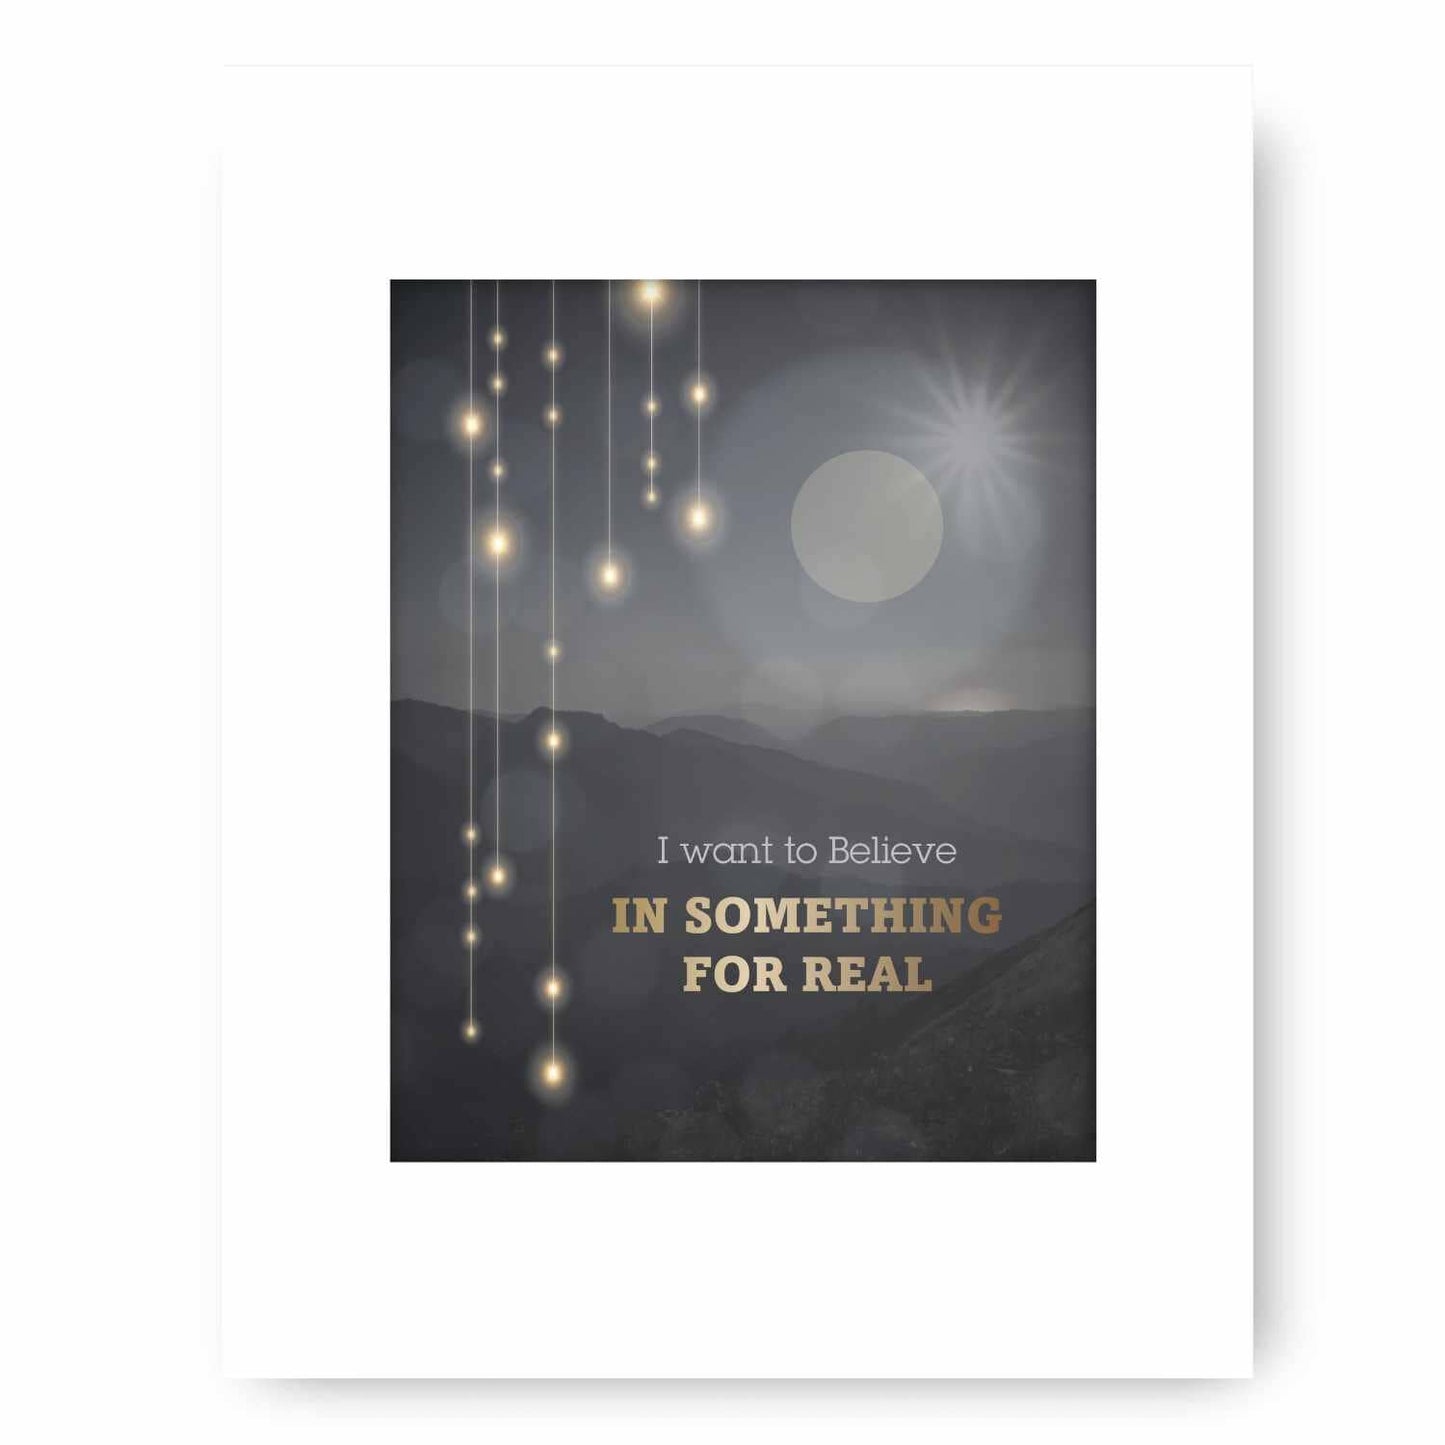 I Want to Believe by Sass Jordan - 80s Music Lyric Art Print Song Lyrics Art Song Lyrics Art 8x10 White Matted Print 